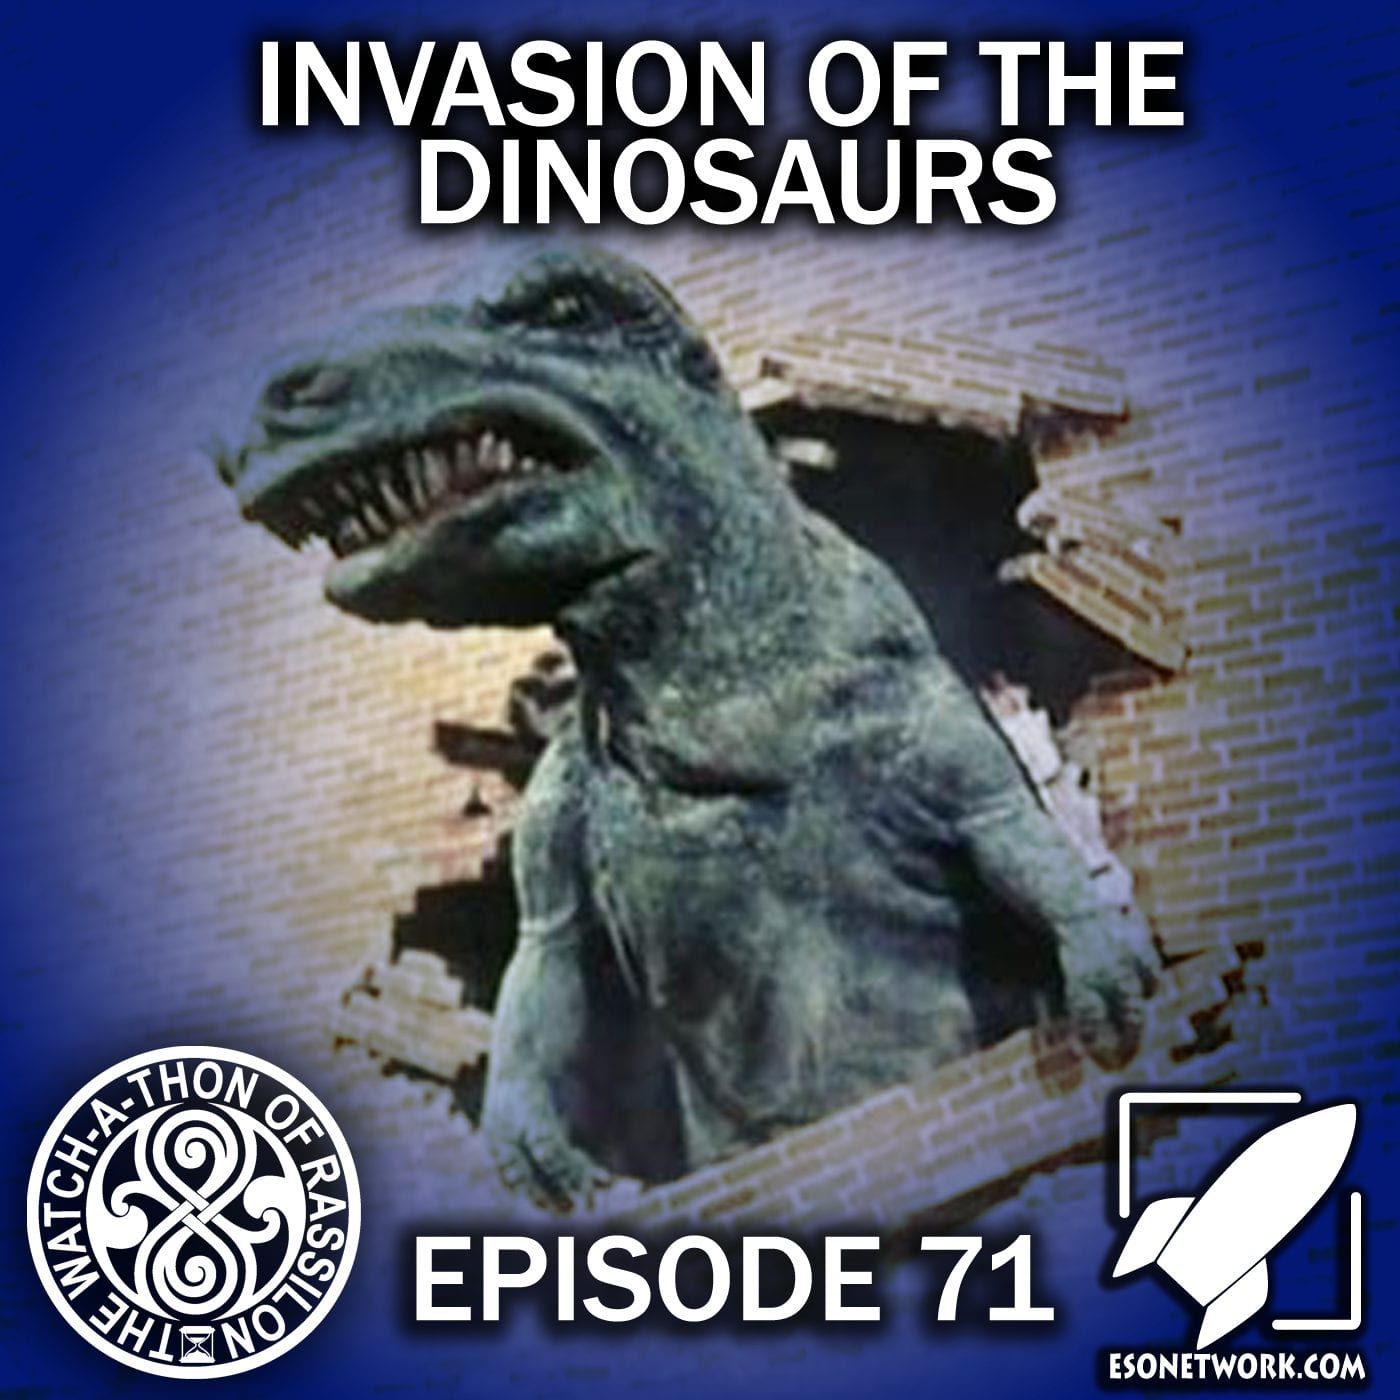 The Watch-A-Thon of Rassilon: Episode 71: Invasion of the Dinosaurs